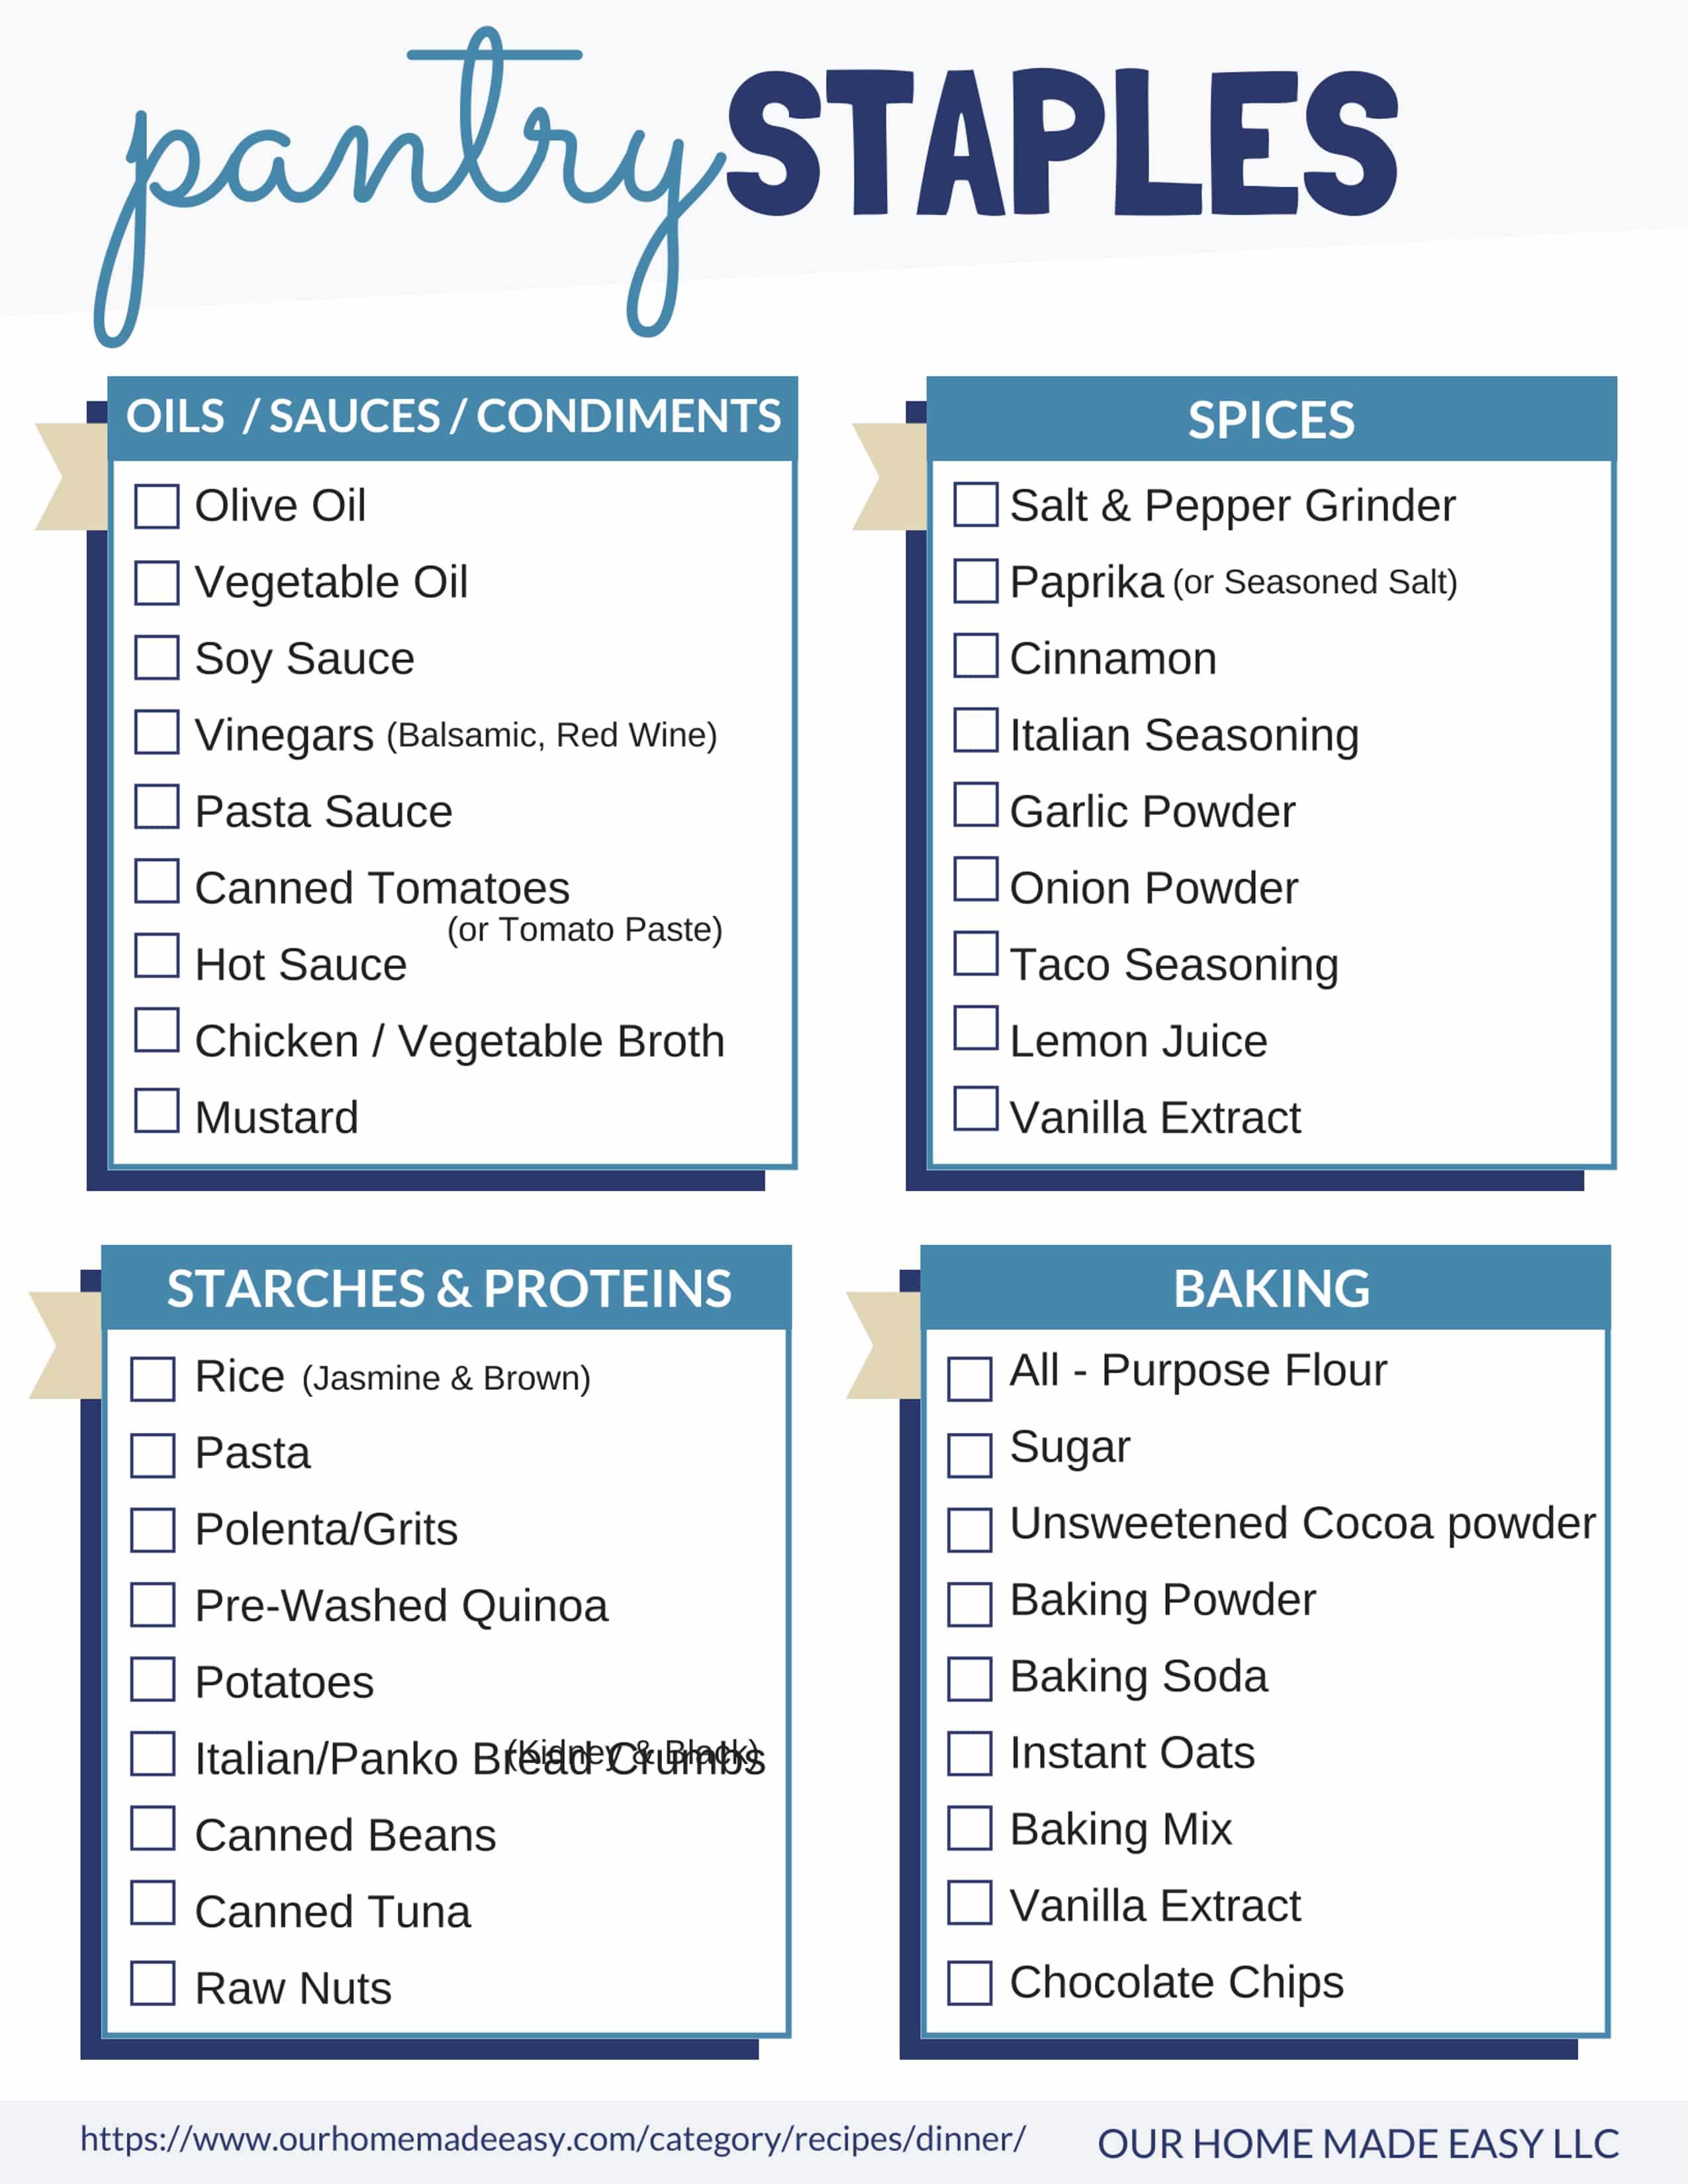 List of Pantry Essentials to Make Many Delicious Meals